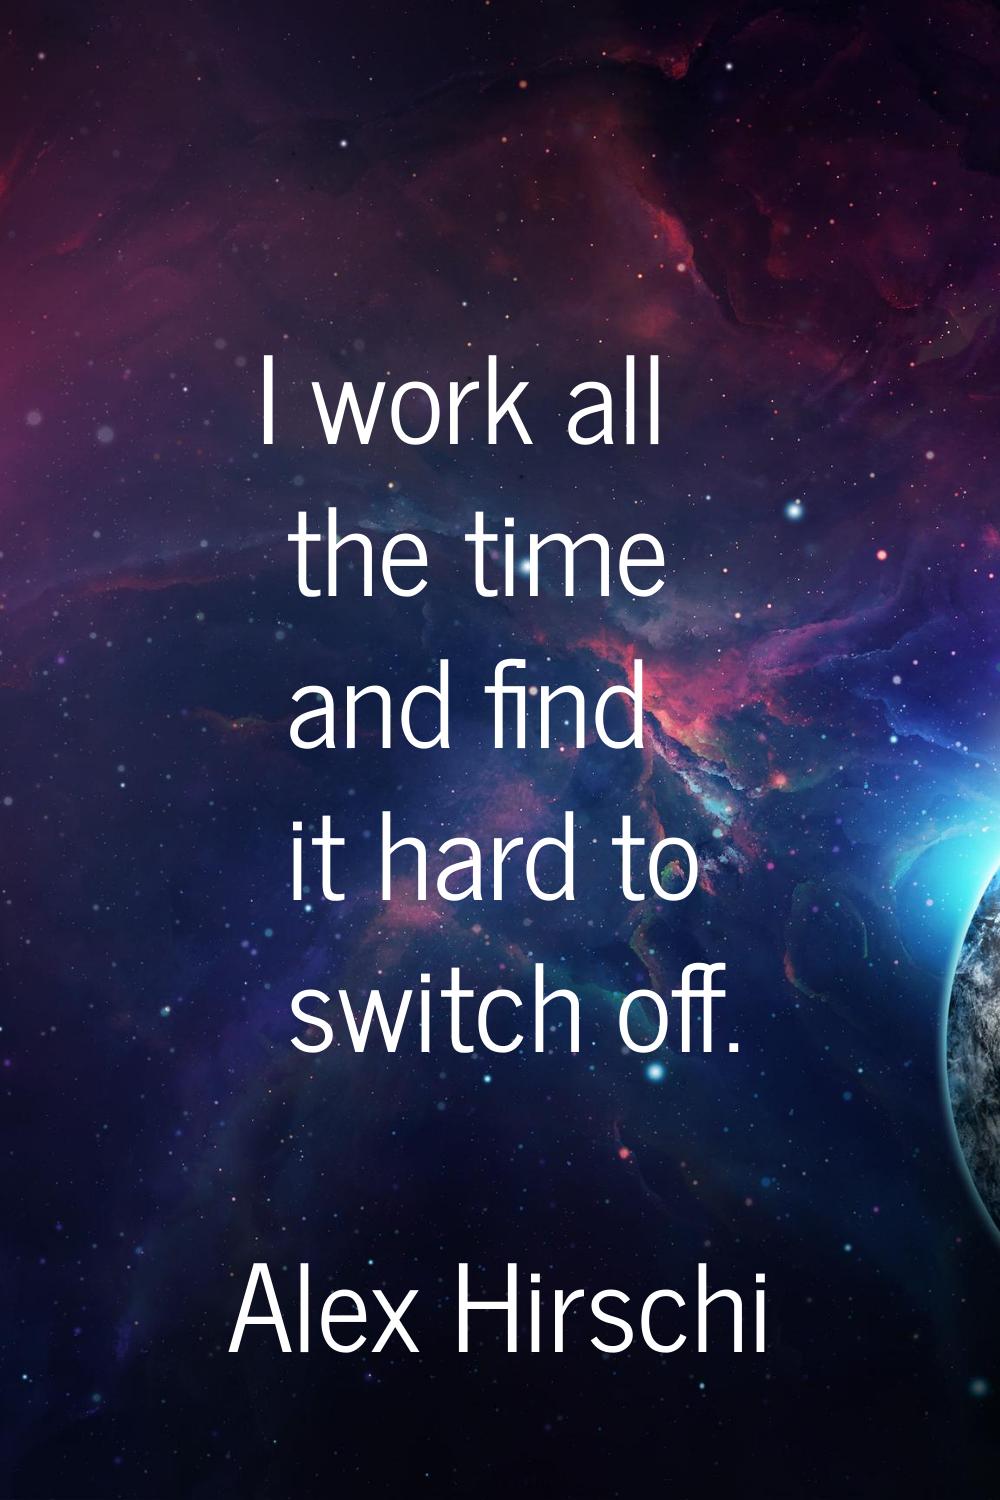 I work all the time and find it hard to switch off.